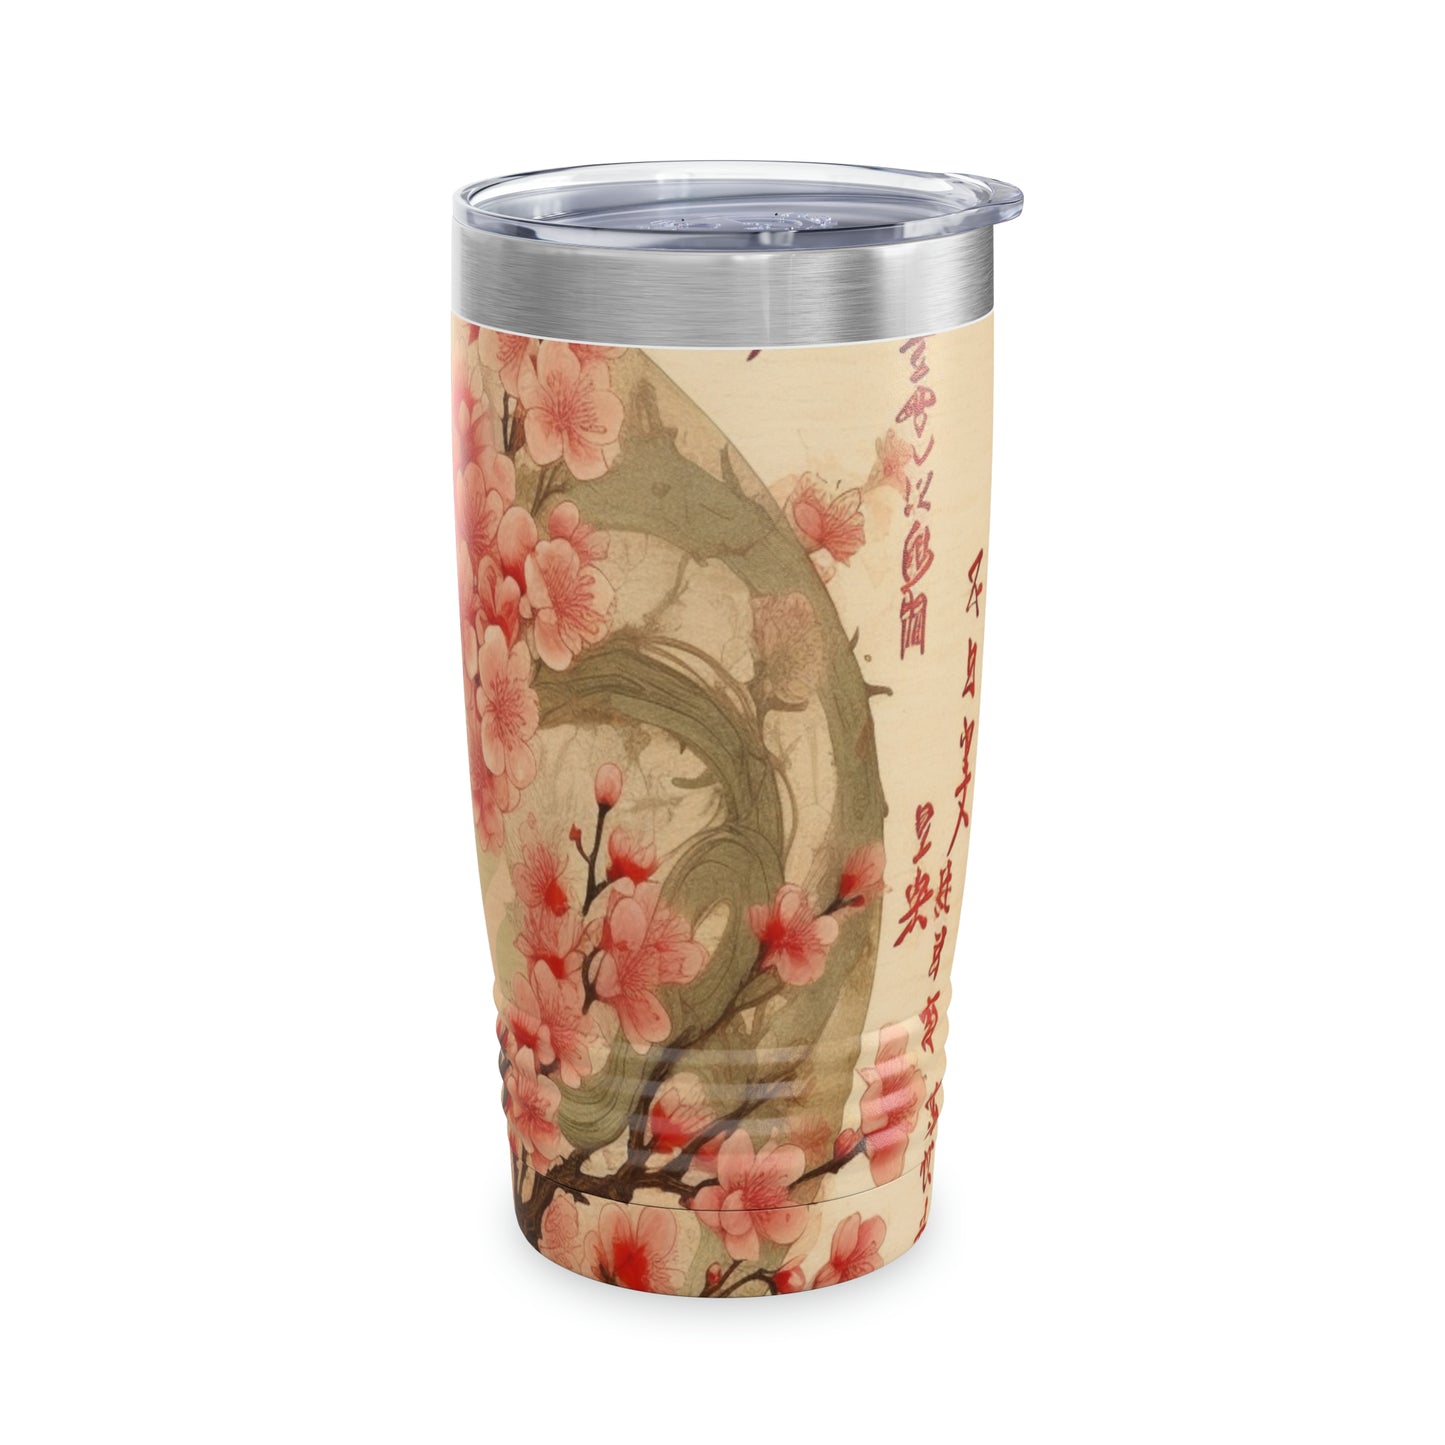 Whimsical Blossom Dreams: Ringneck Tumbler with Delightful Flower Drawings and Cherry Blossoms